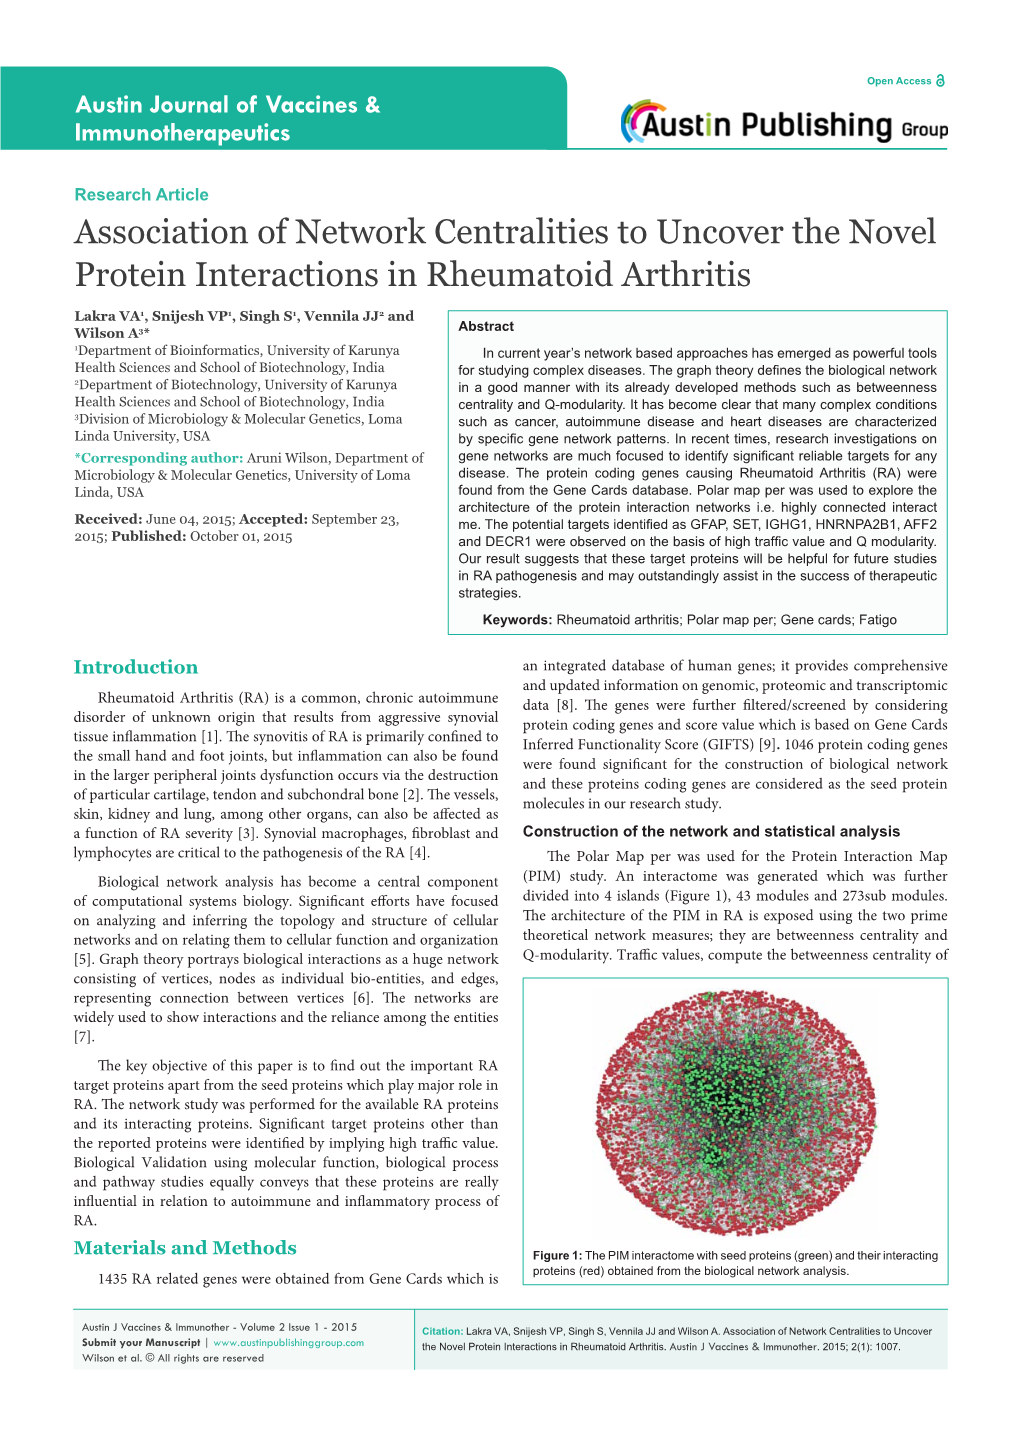 Association of Network Centralities to Uncover the Novel Protein Interactions in Rheumatoid Arthritis